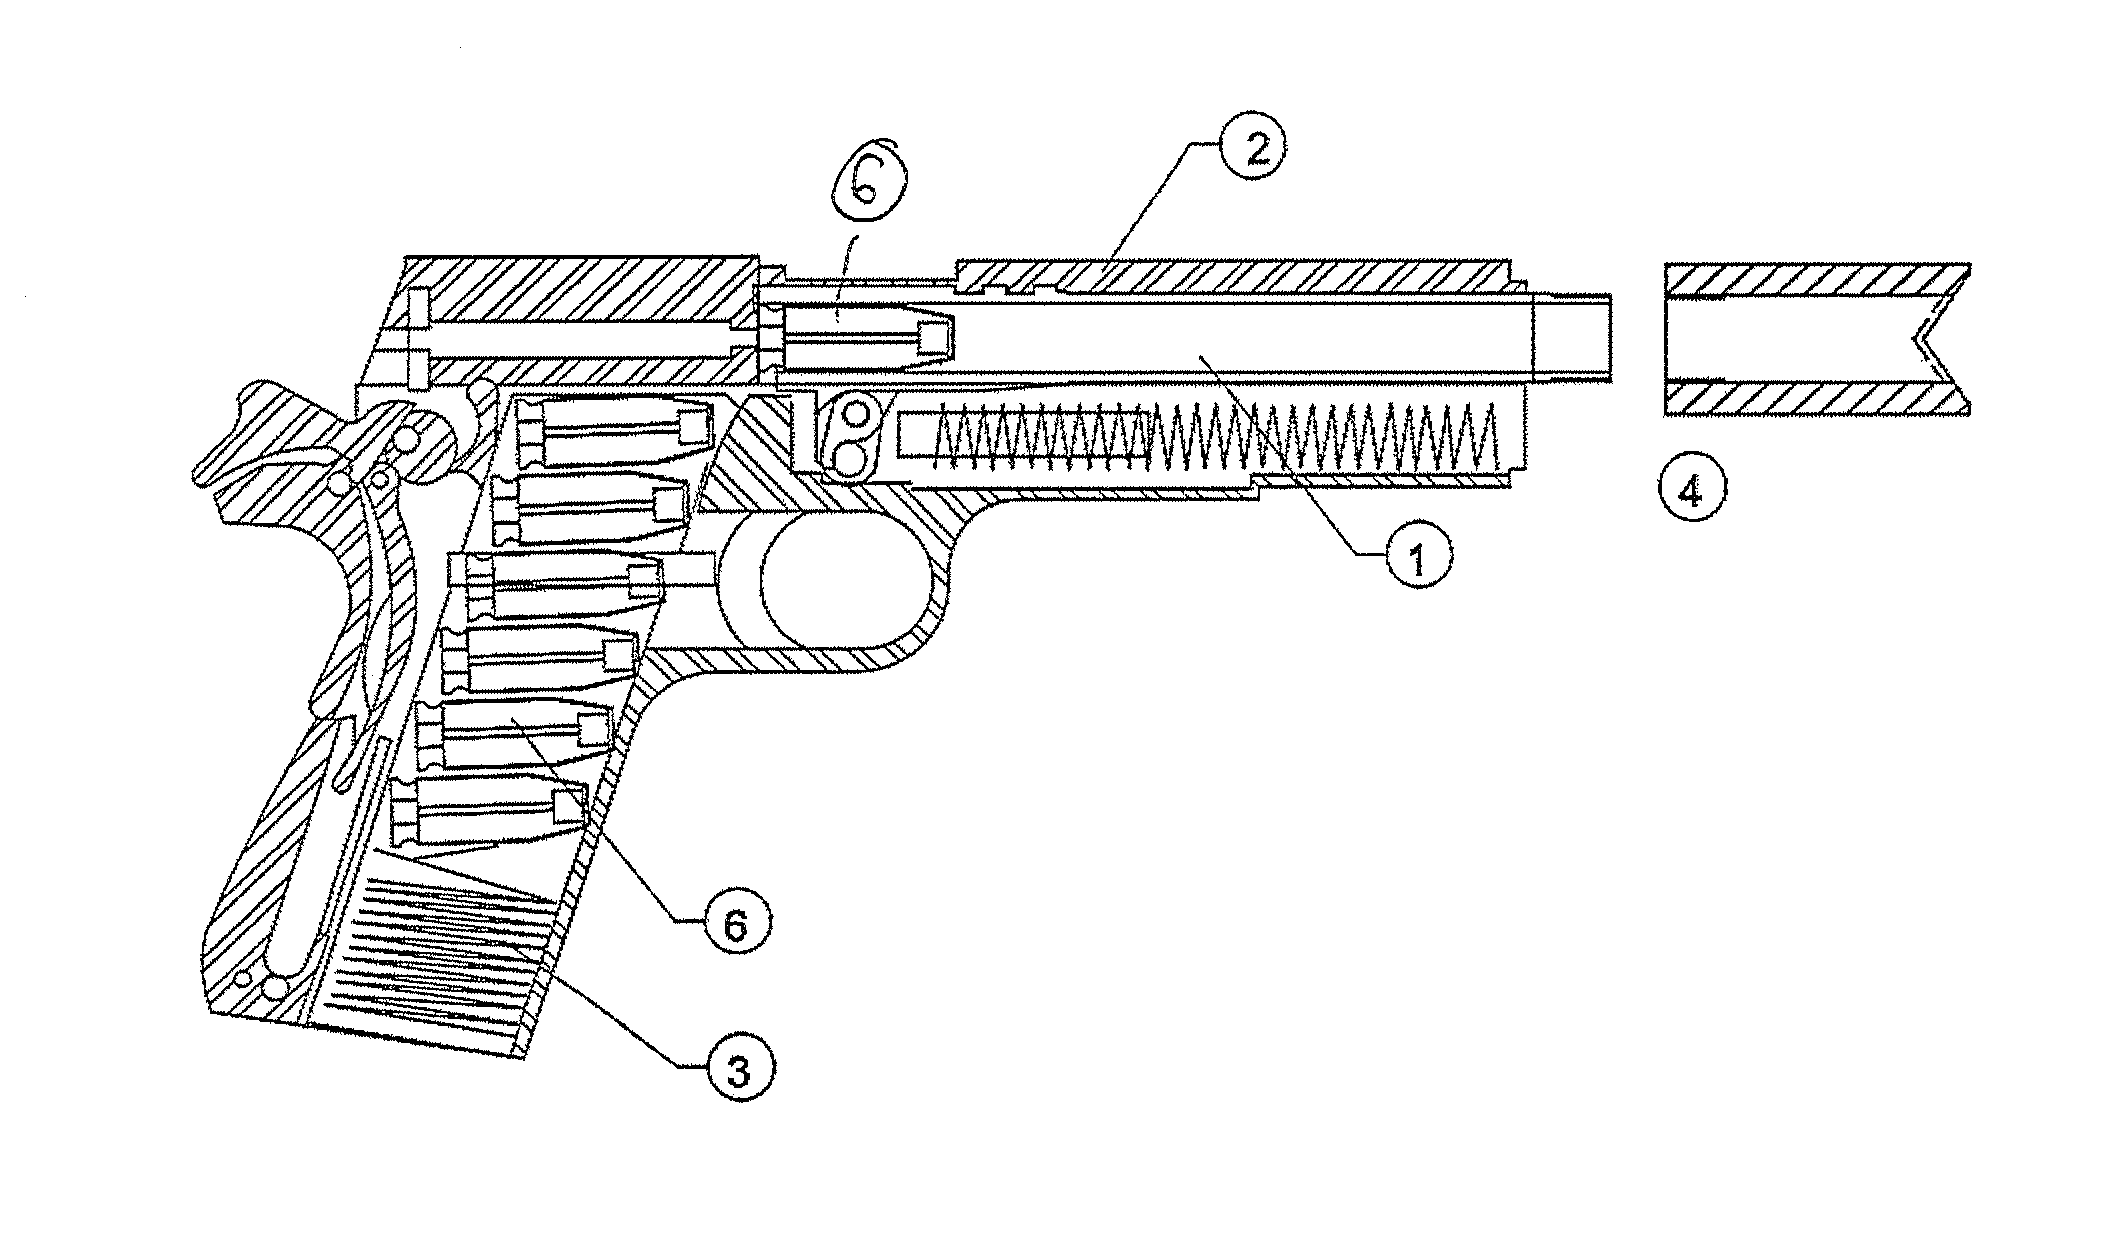 Apparatus for metal cutting and welding